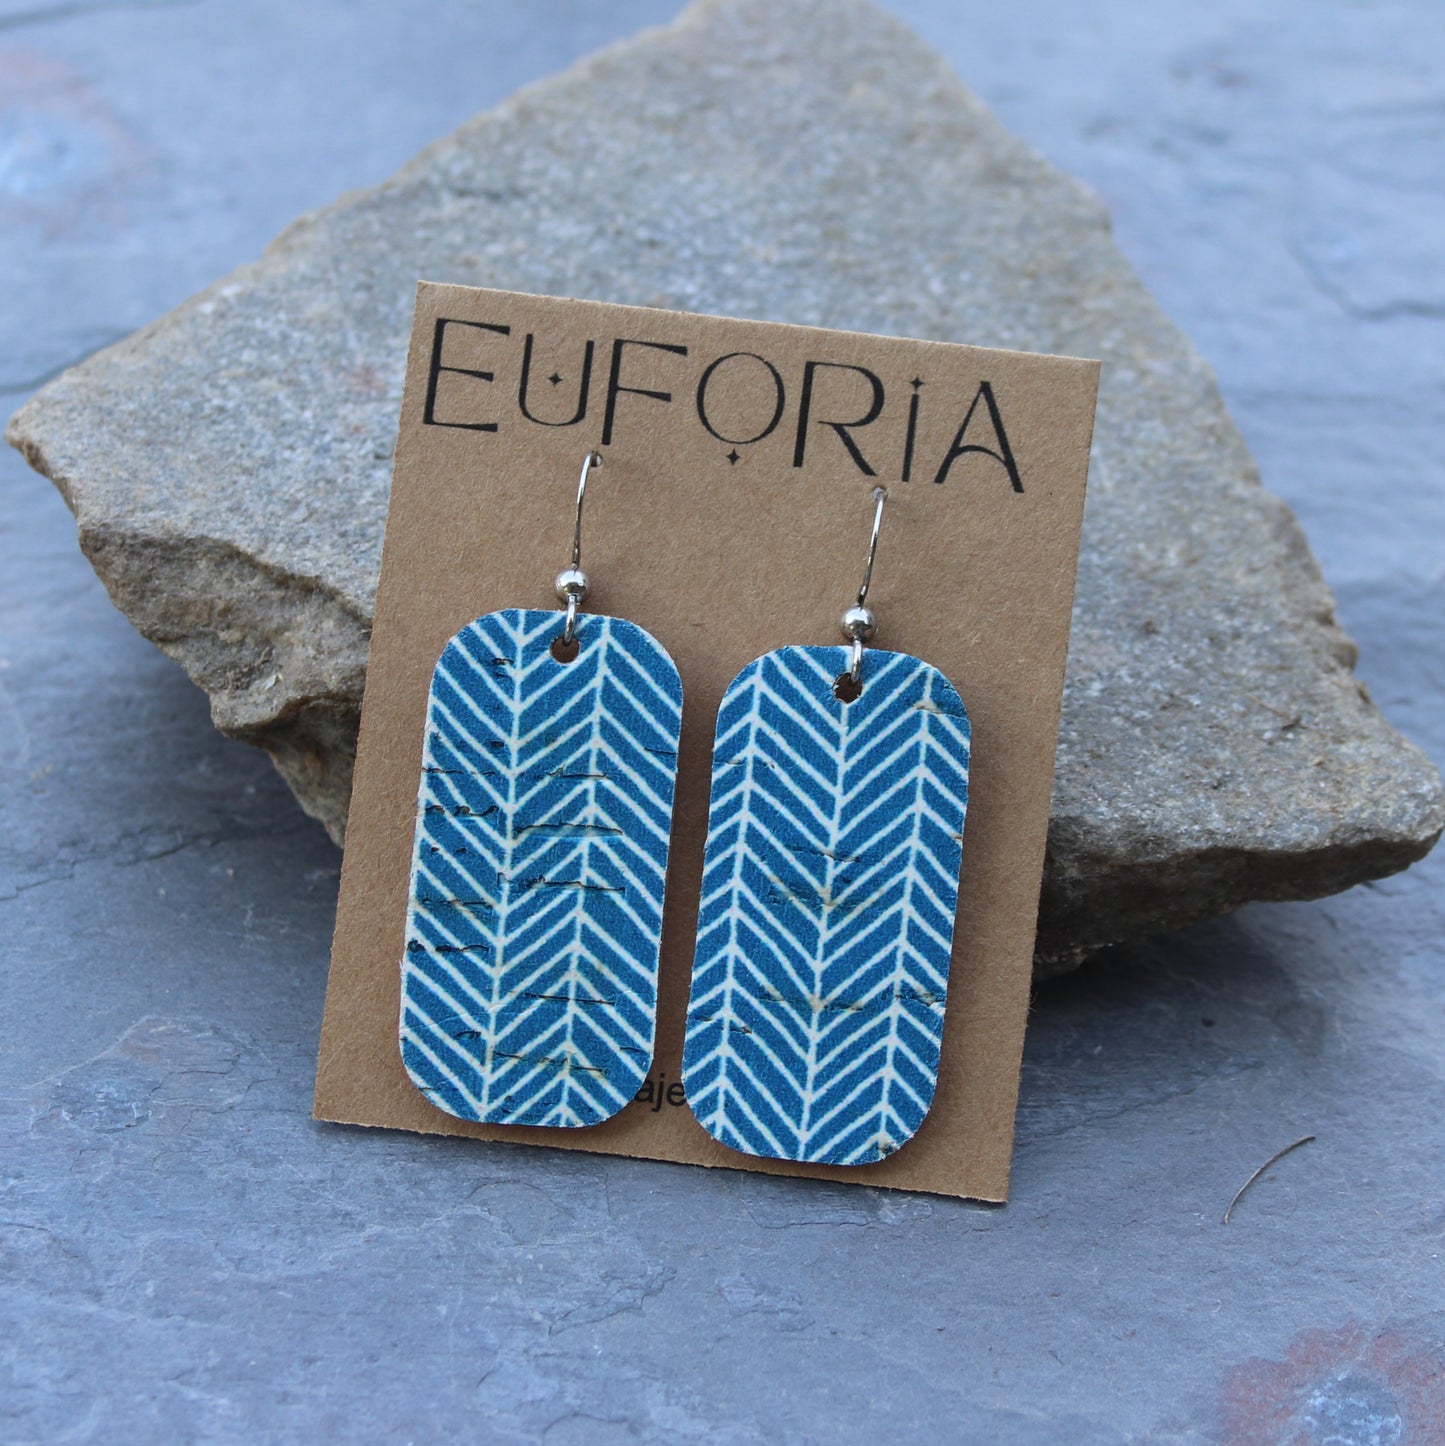 Cork over leather small barrel earrings, blue and white chevron pattern